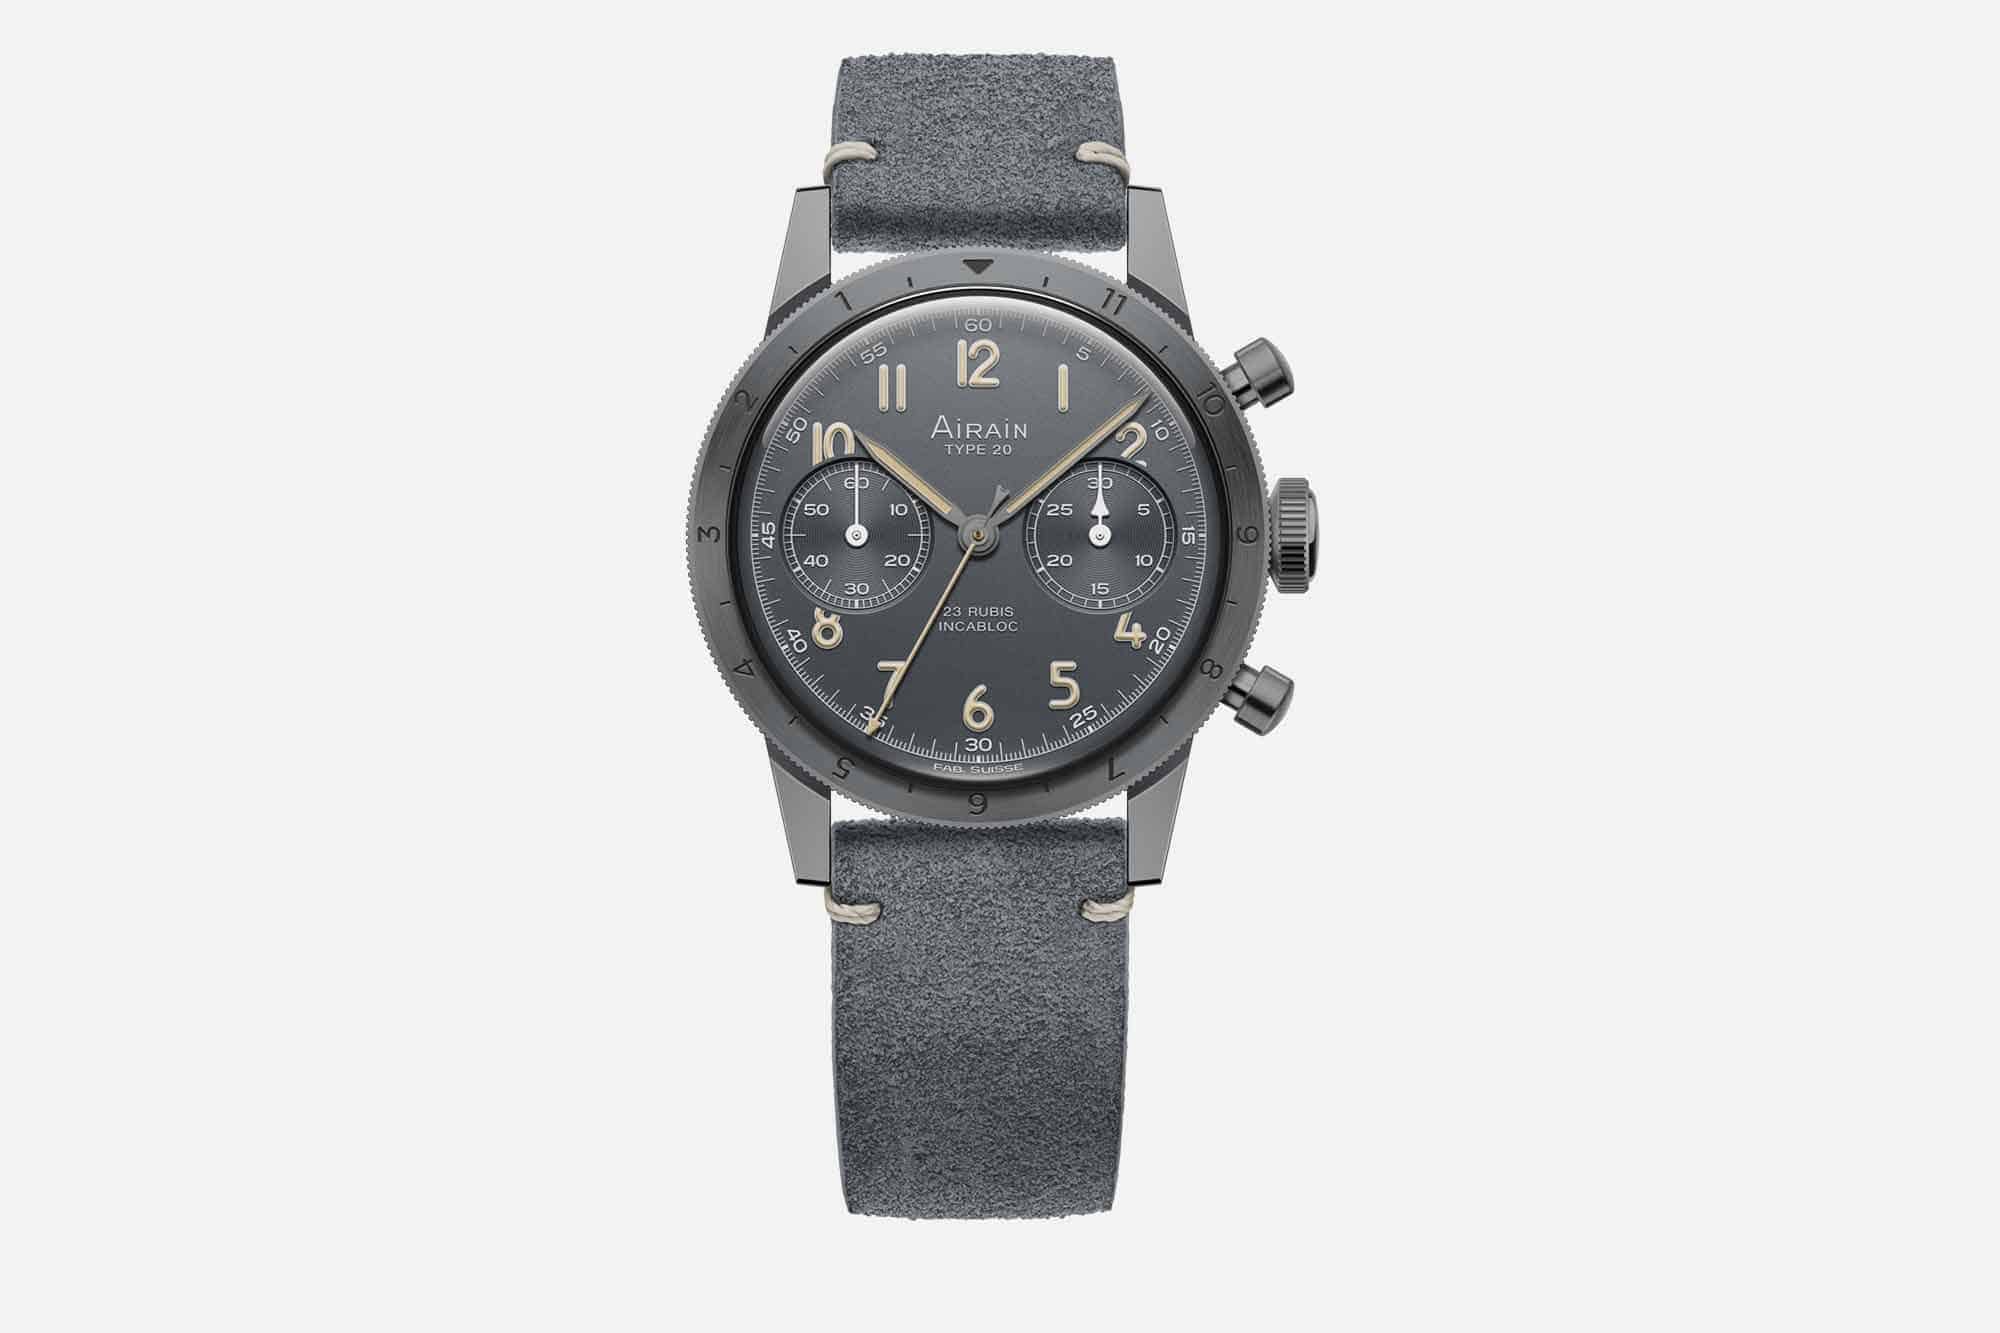 Airain Updates their Type 20 in a Stealthy Gray Limited Edition